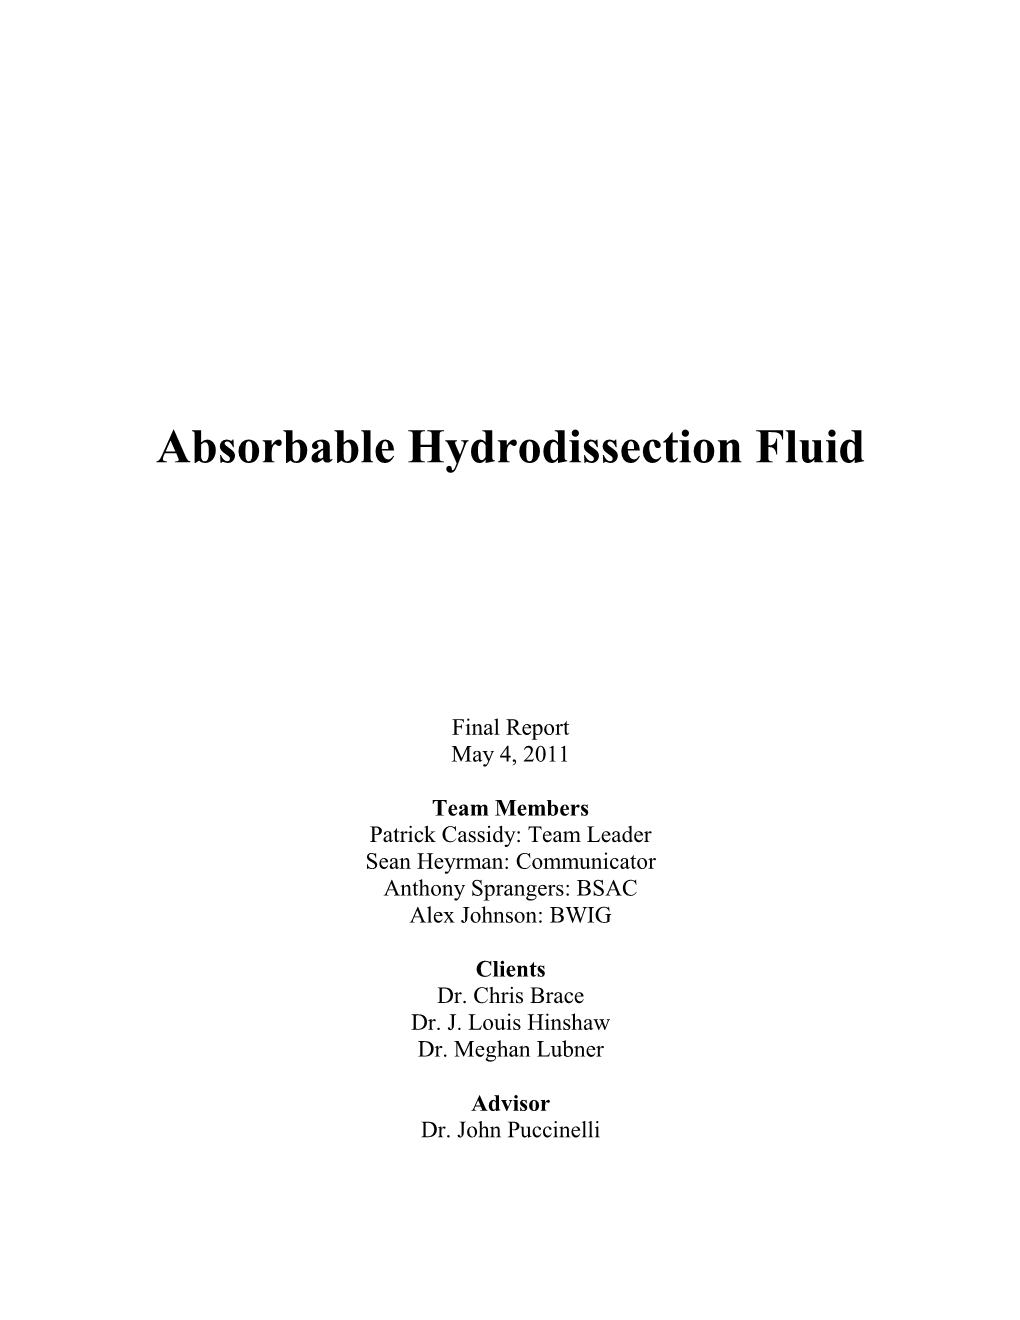 Absorbable Hydrodissection Fluid